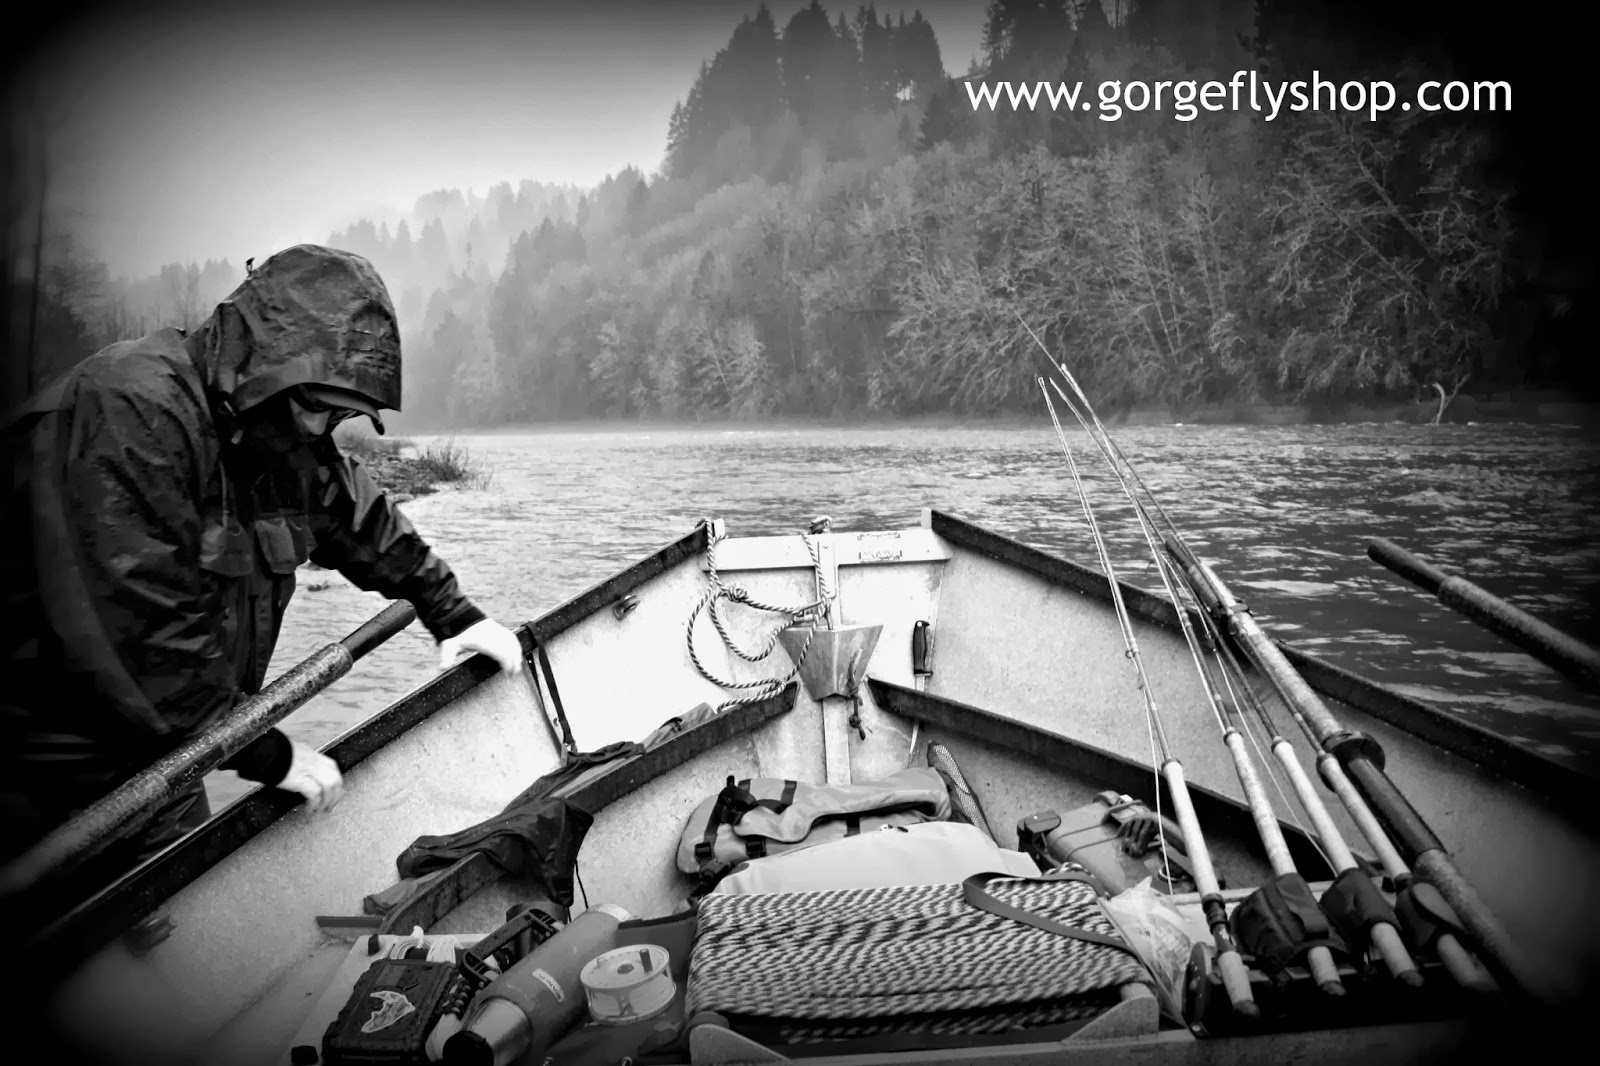 Gorge Fly Shop Blog: Dress for Winter Fly Fishing Success